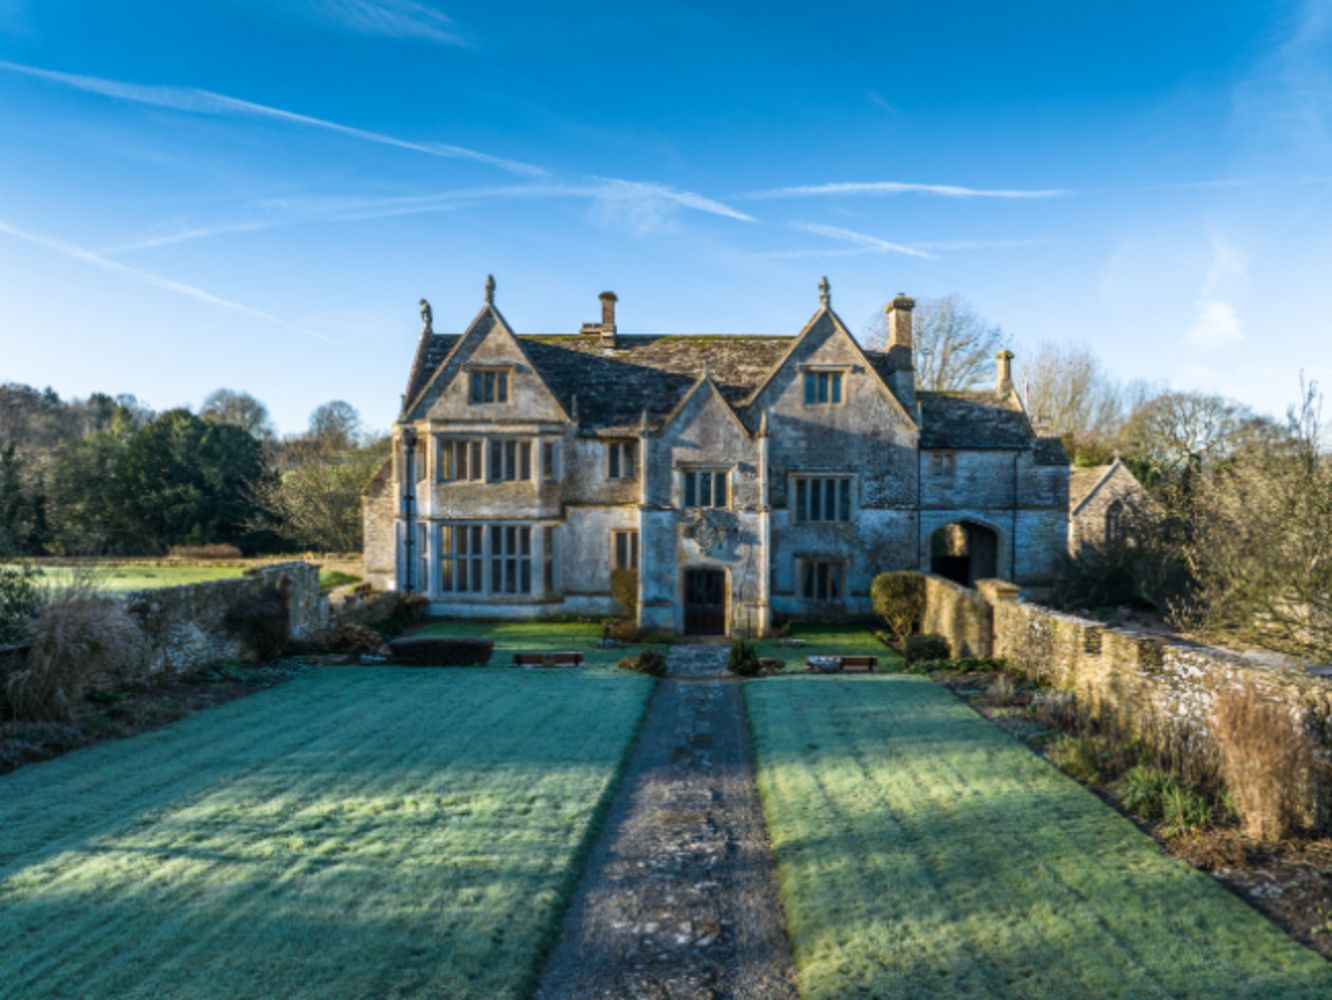 Sandford Orcas Manor: Auction of the Contents